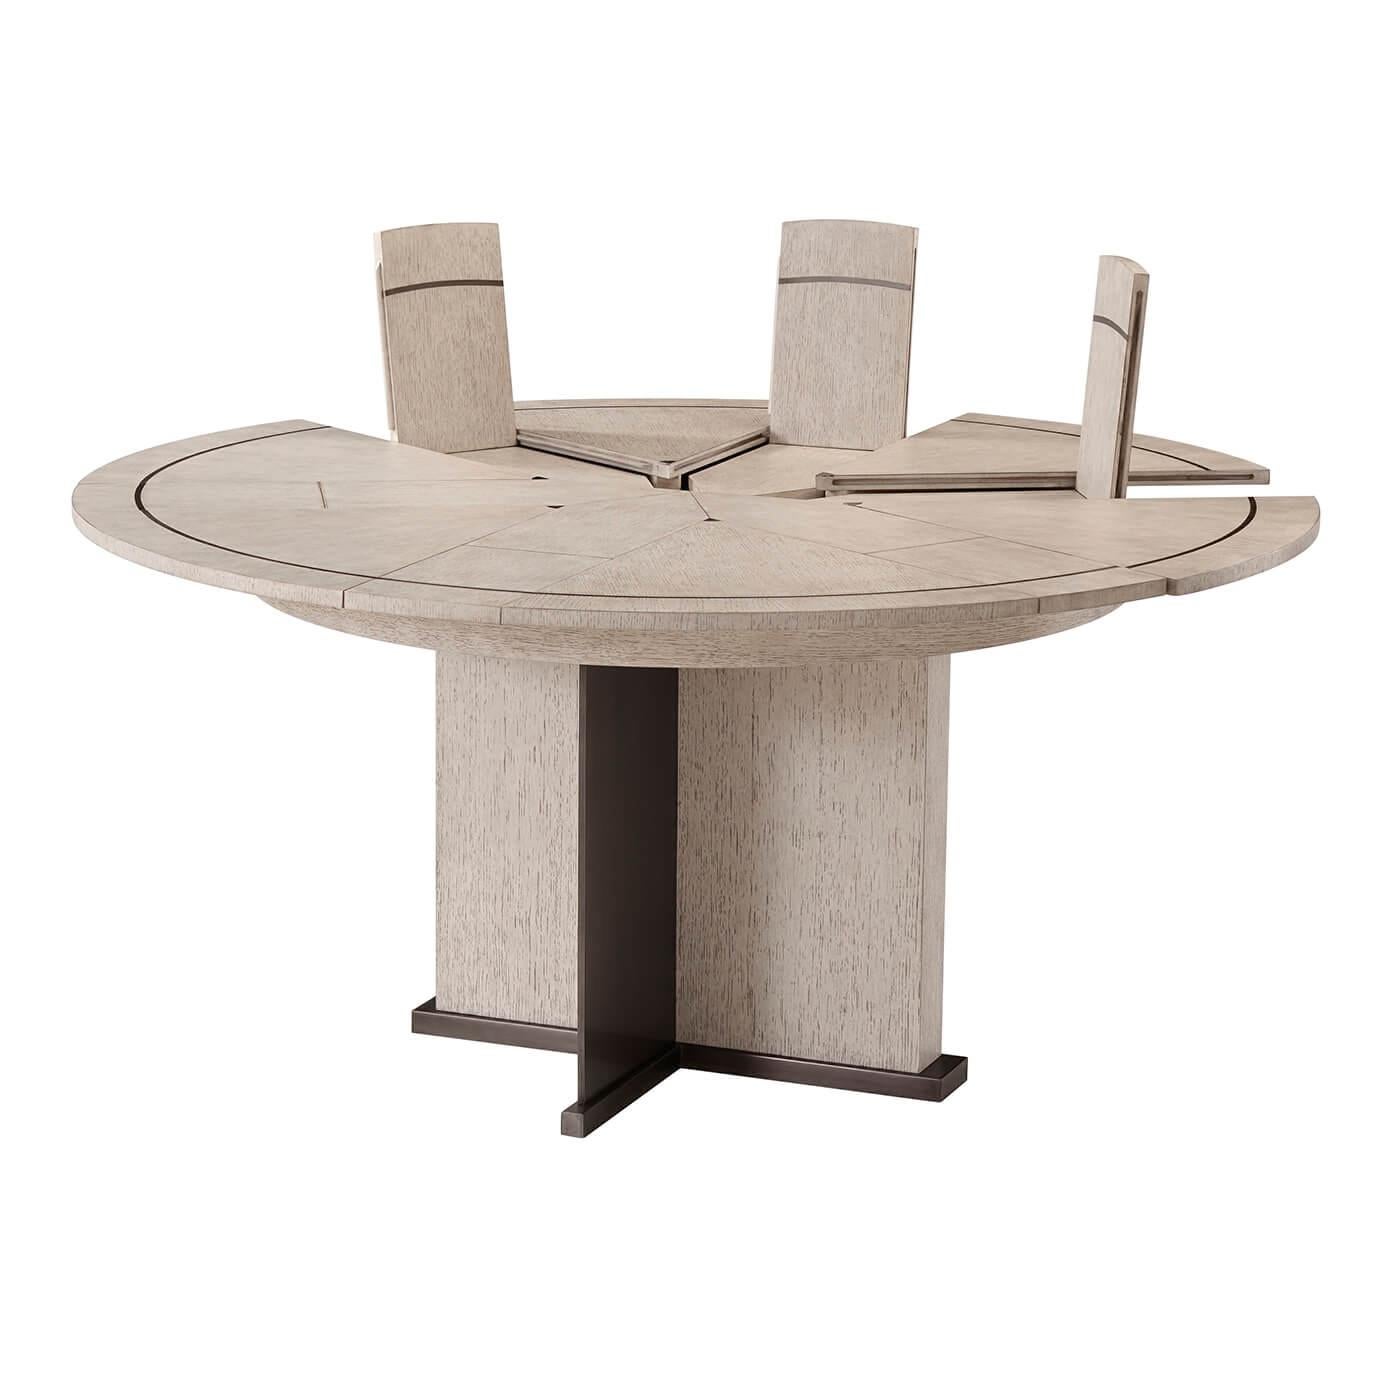 Mid-Century Modern style round extending dining table with quartered oak veneer with our gowan finish, six pie-shaped leaves and six integral fold-out leaves with matte tungsten finish metal inlaid top on a matter tungsten metal and oak crossover